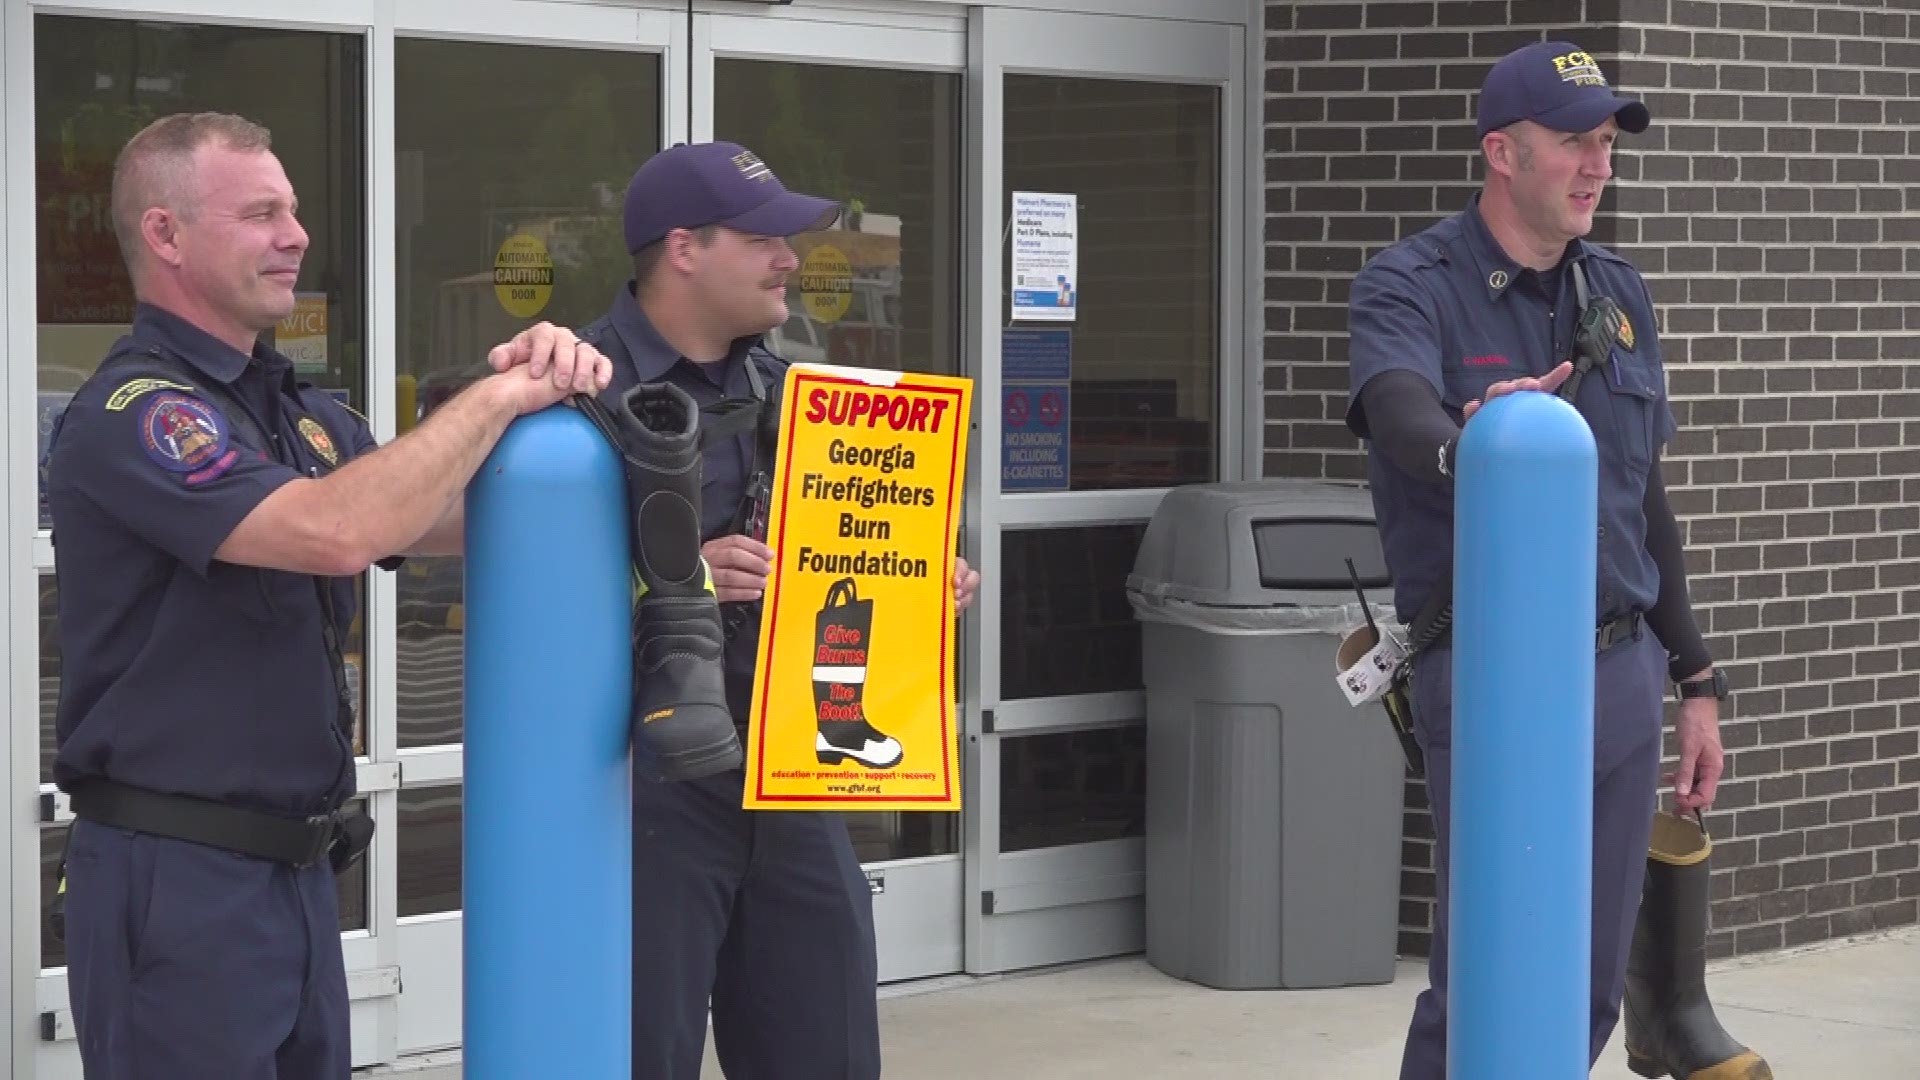 This year, increased traffic in the area has made it too dangerous to look for donations at intersections. Forsyth County firefighters are setting up in front of stores to accept donations for charity this year.